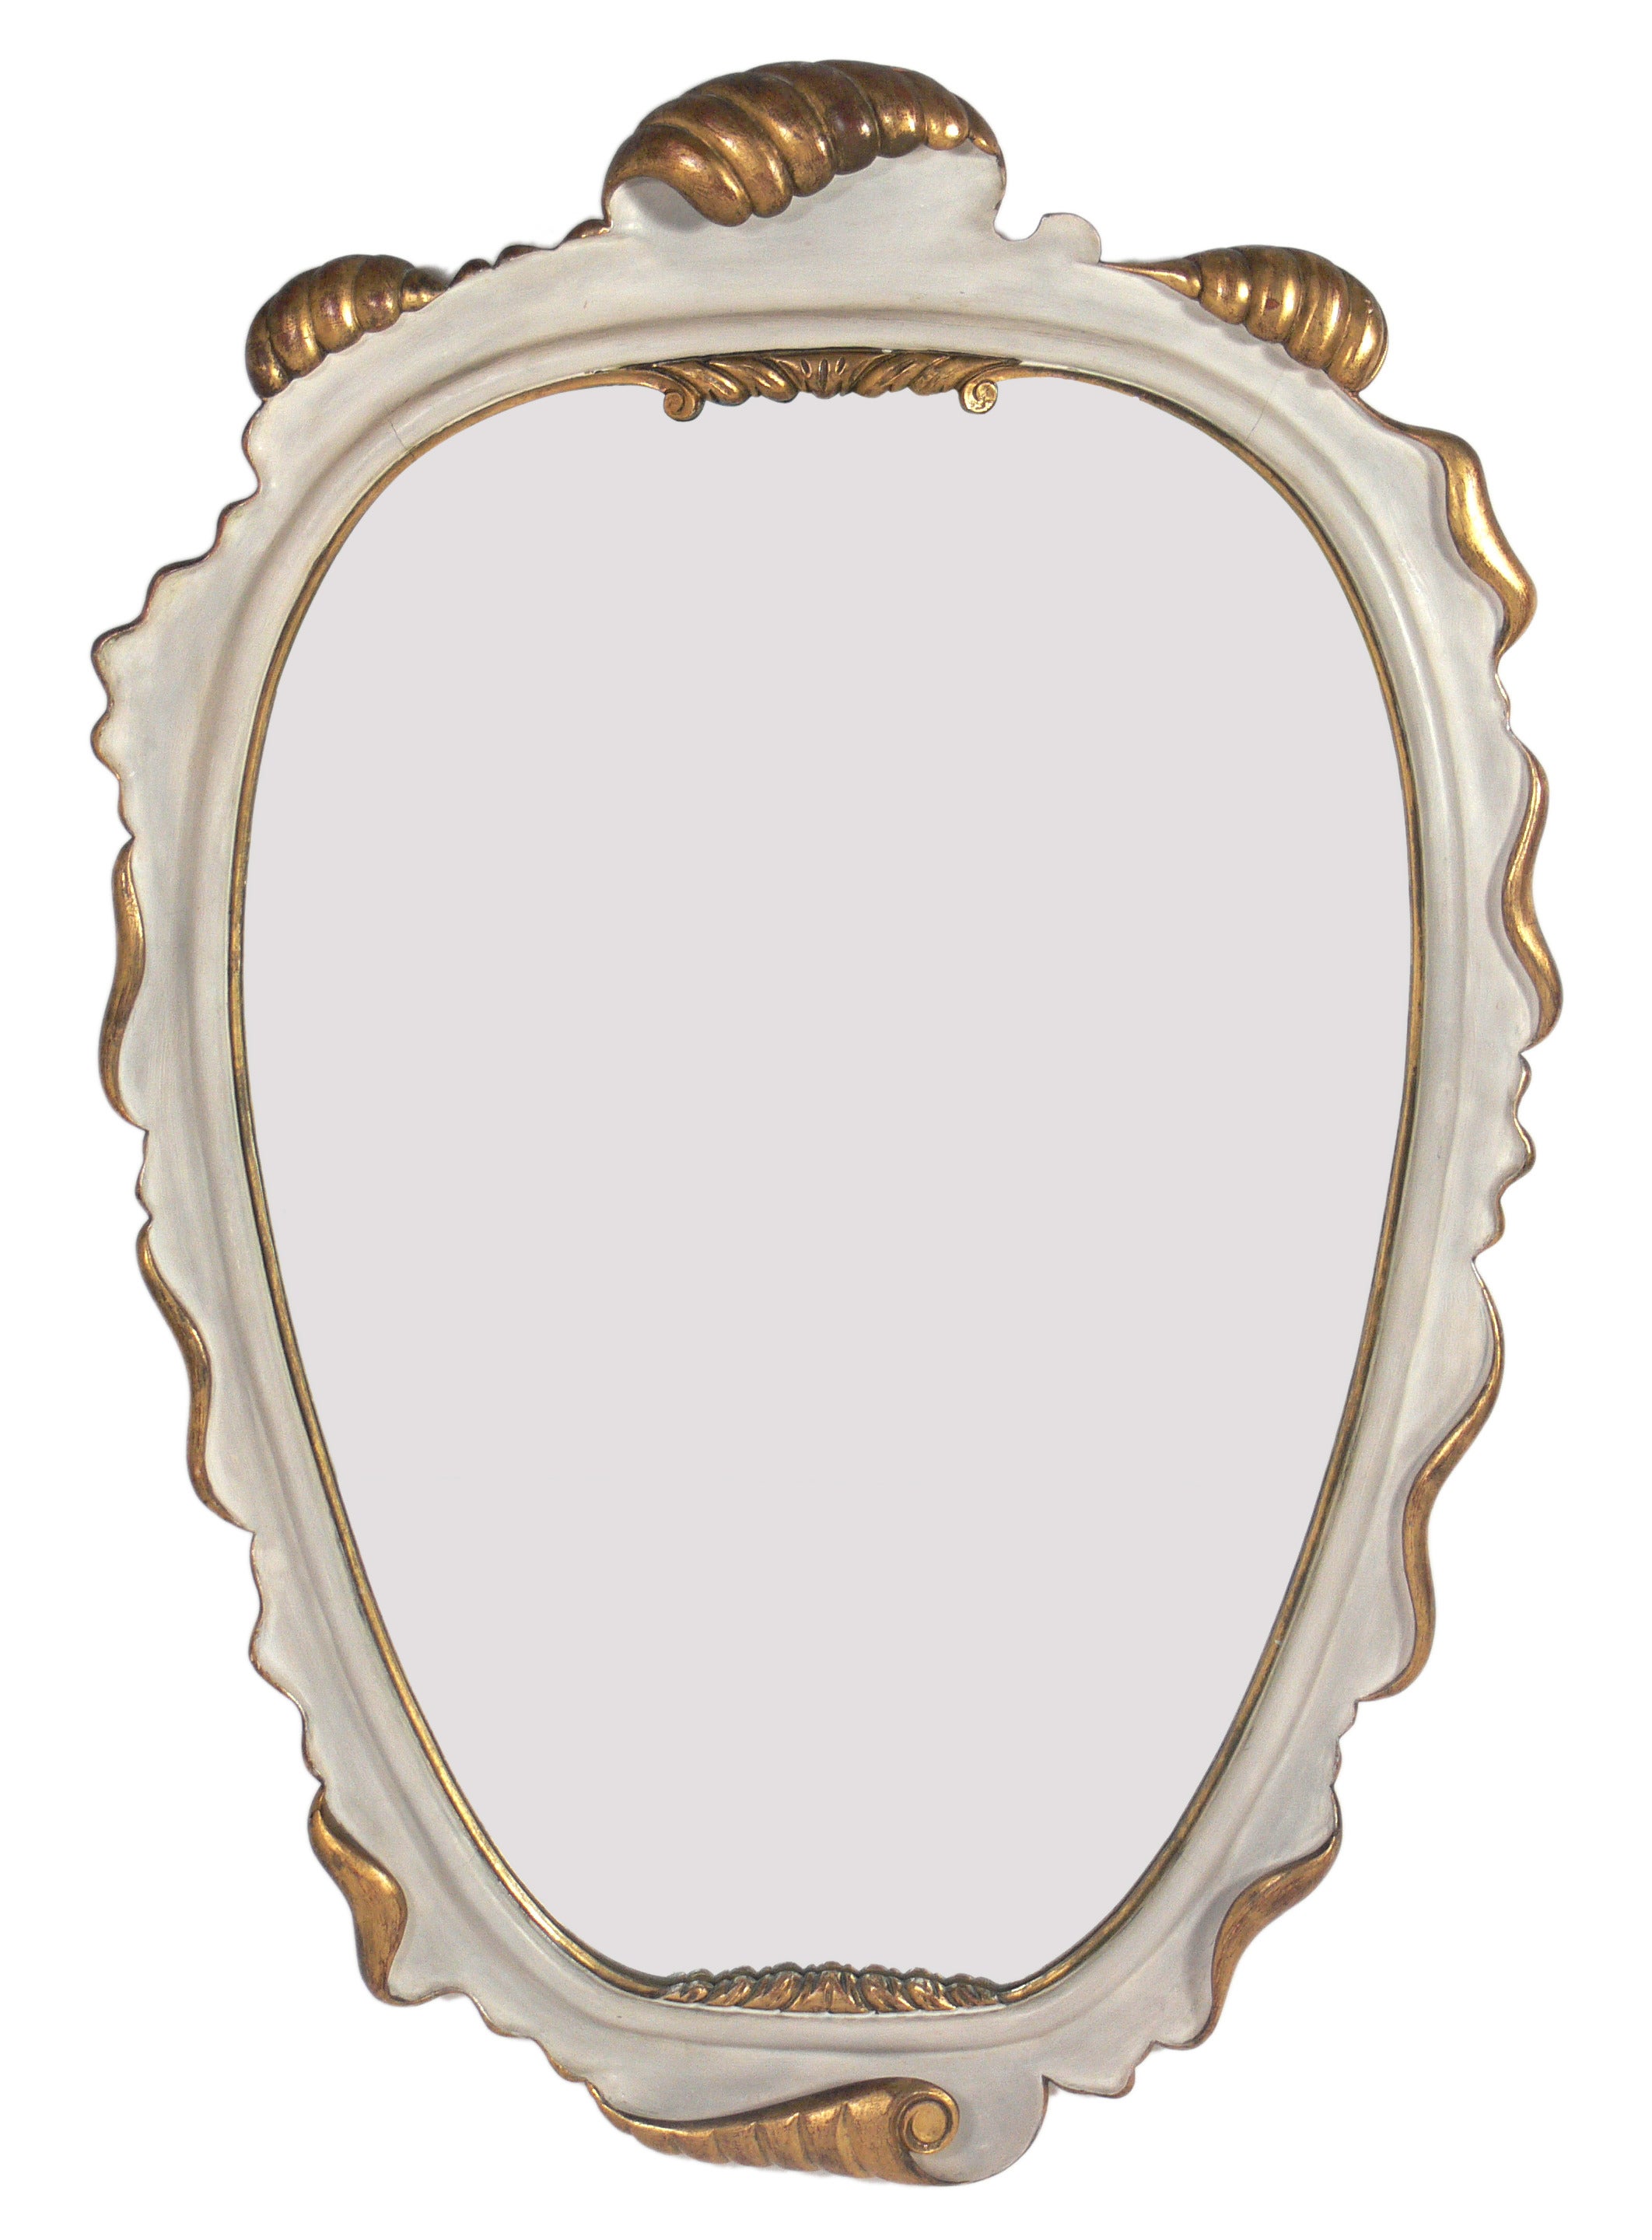 Elegant Ivory Color and Gilt Scrolled Mirror in the manner of Dorothy Draper